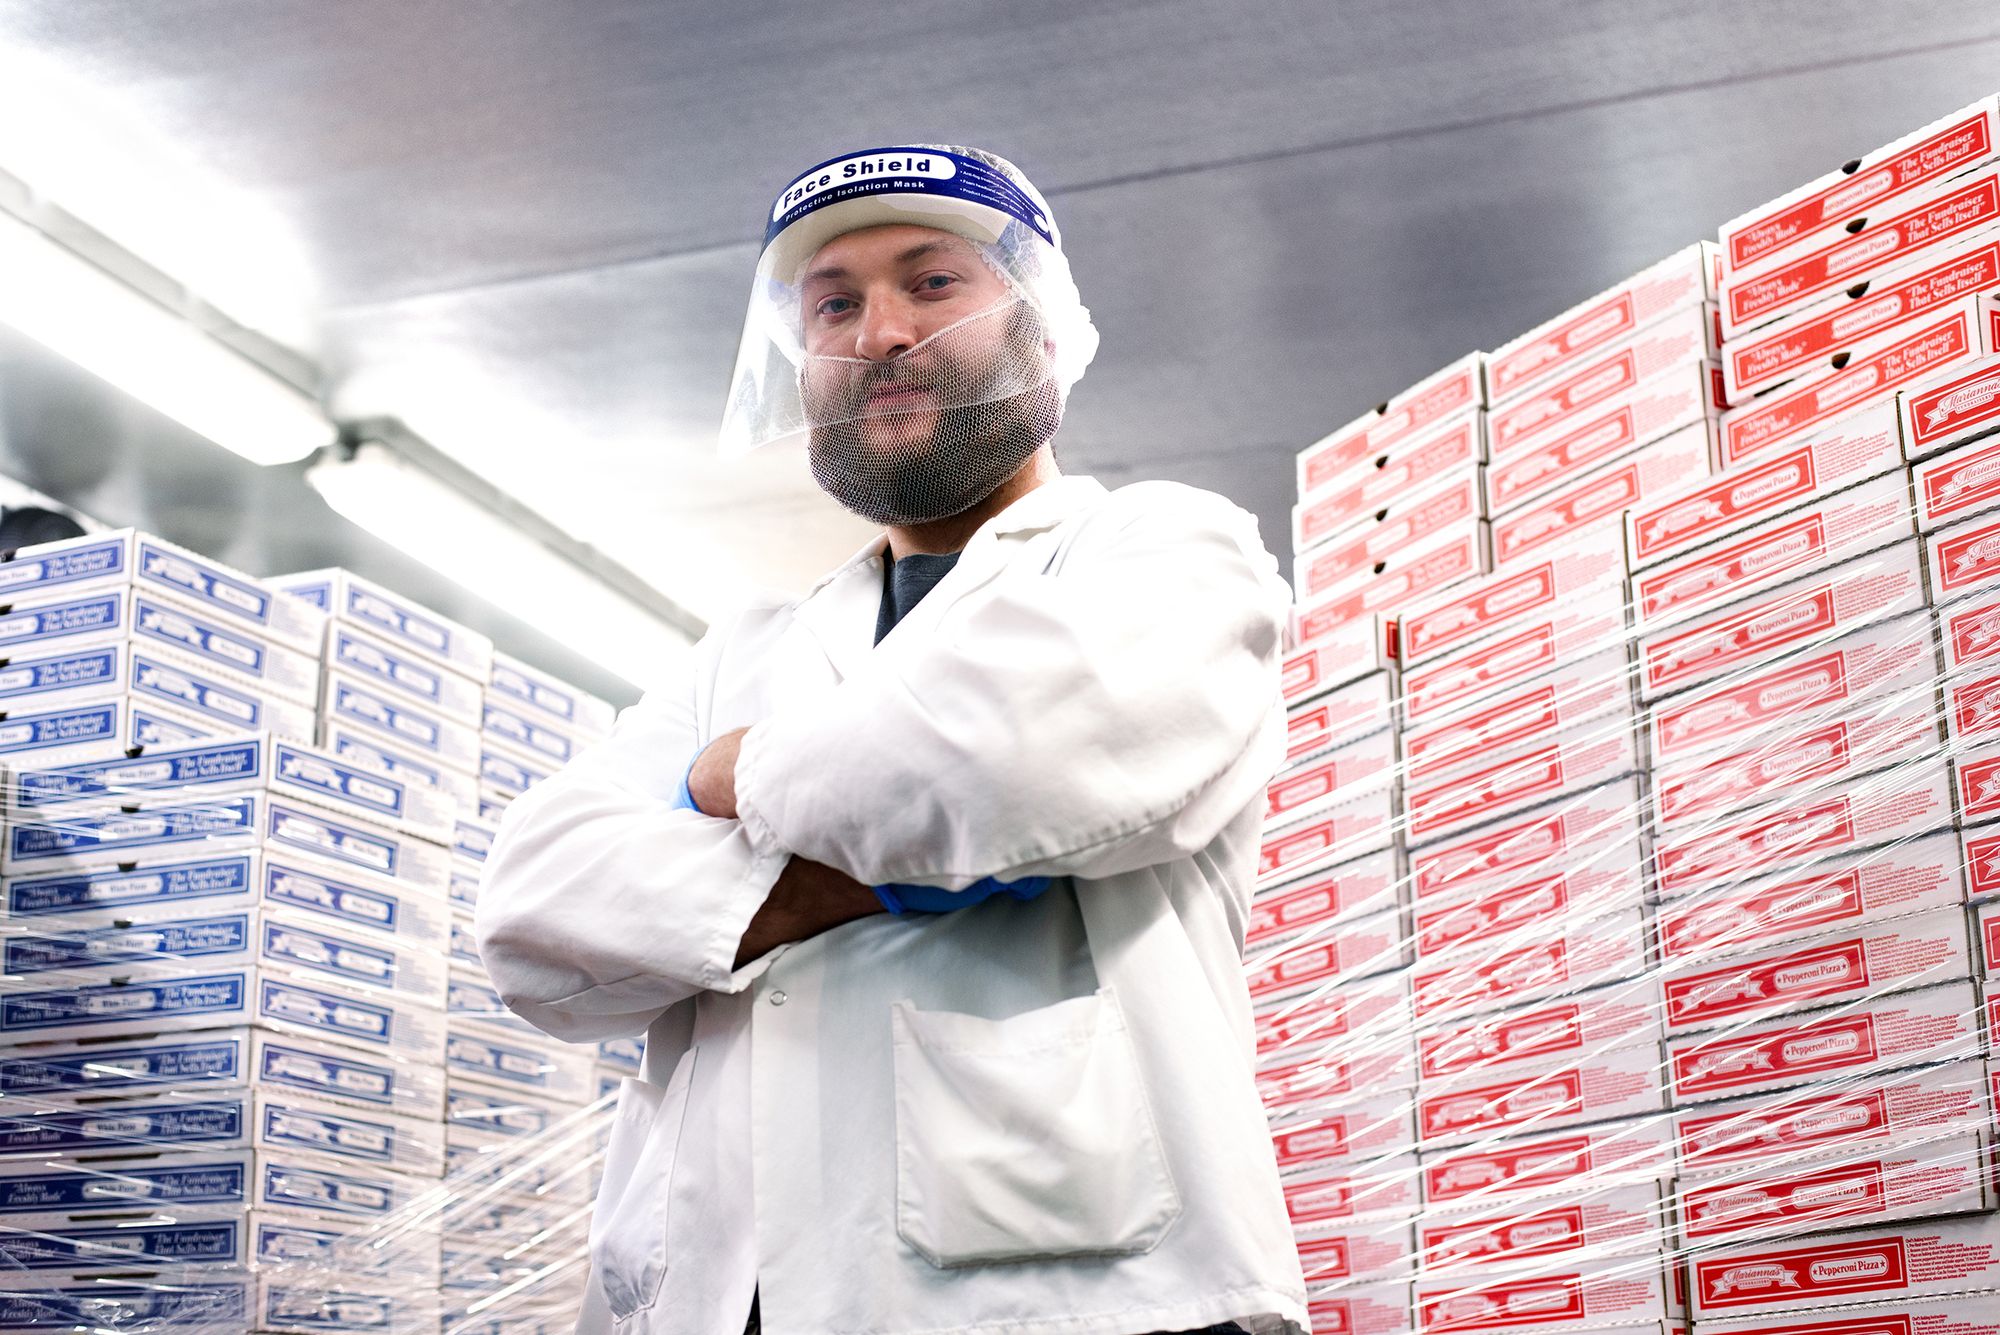 marianna's employee wearing white coat, face shield, beard and hair net posing in front of stacks of pizza boxes